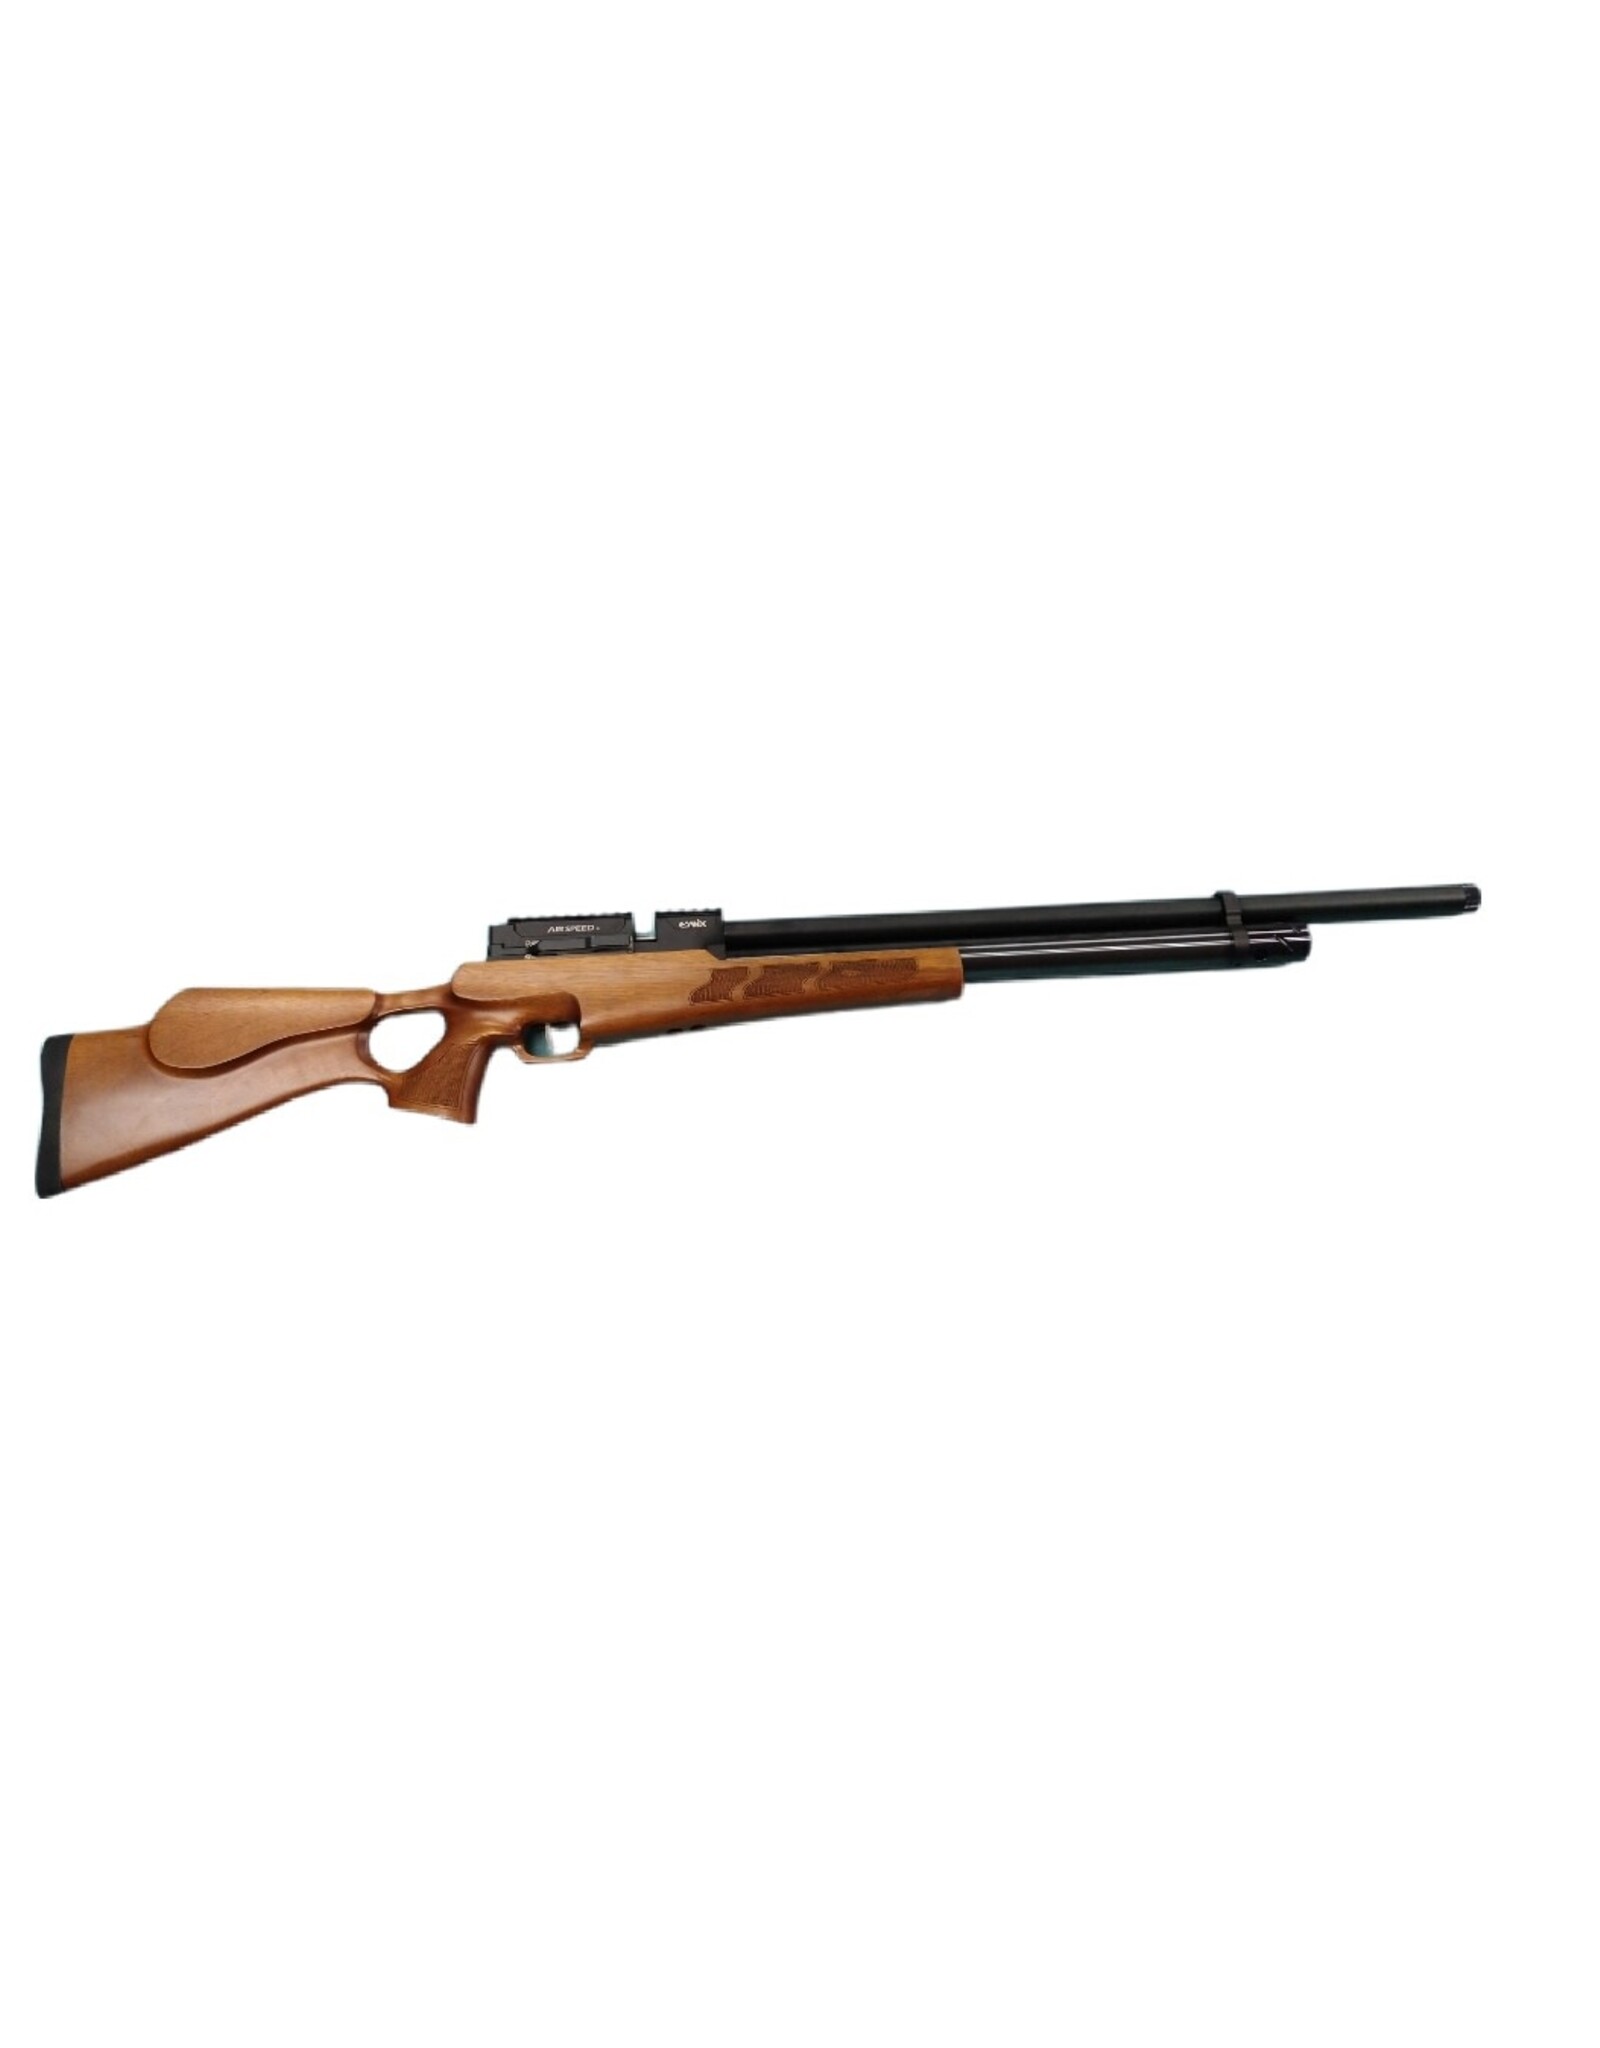 Evanix .22 (5.5mm) Evanix Air Speed PCP Air Rifle with Wood Stock